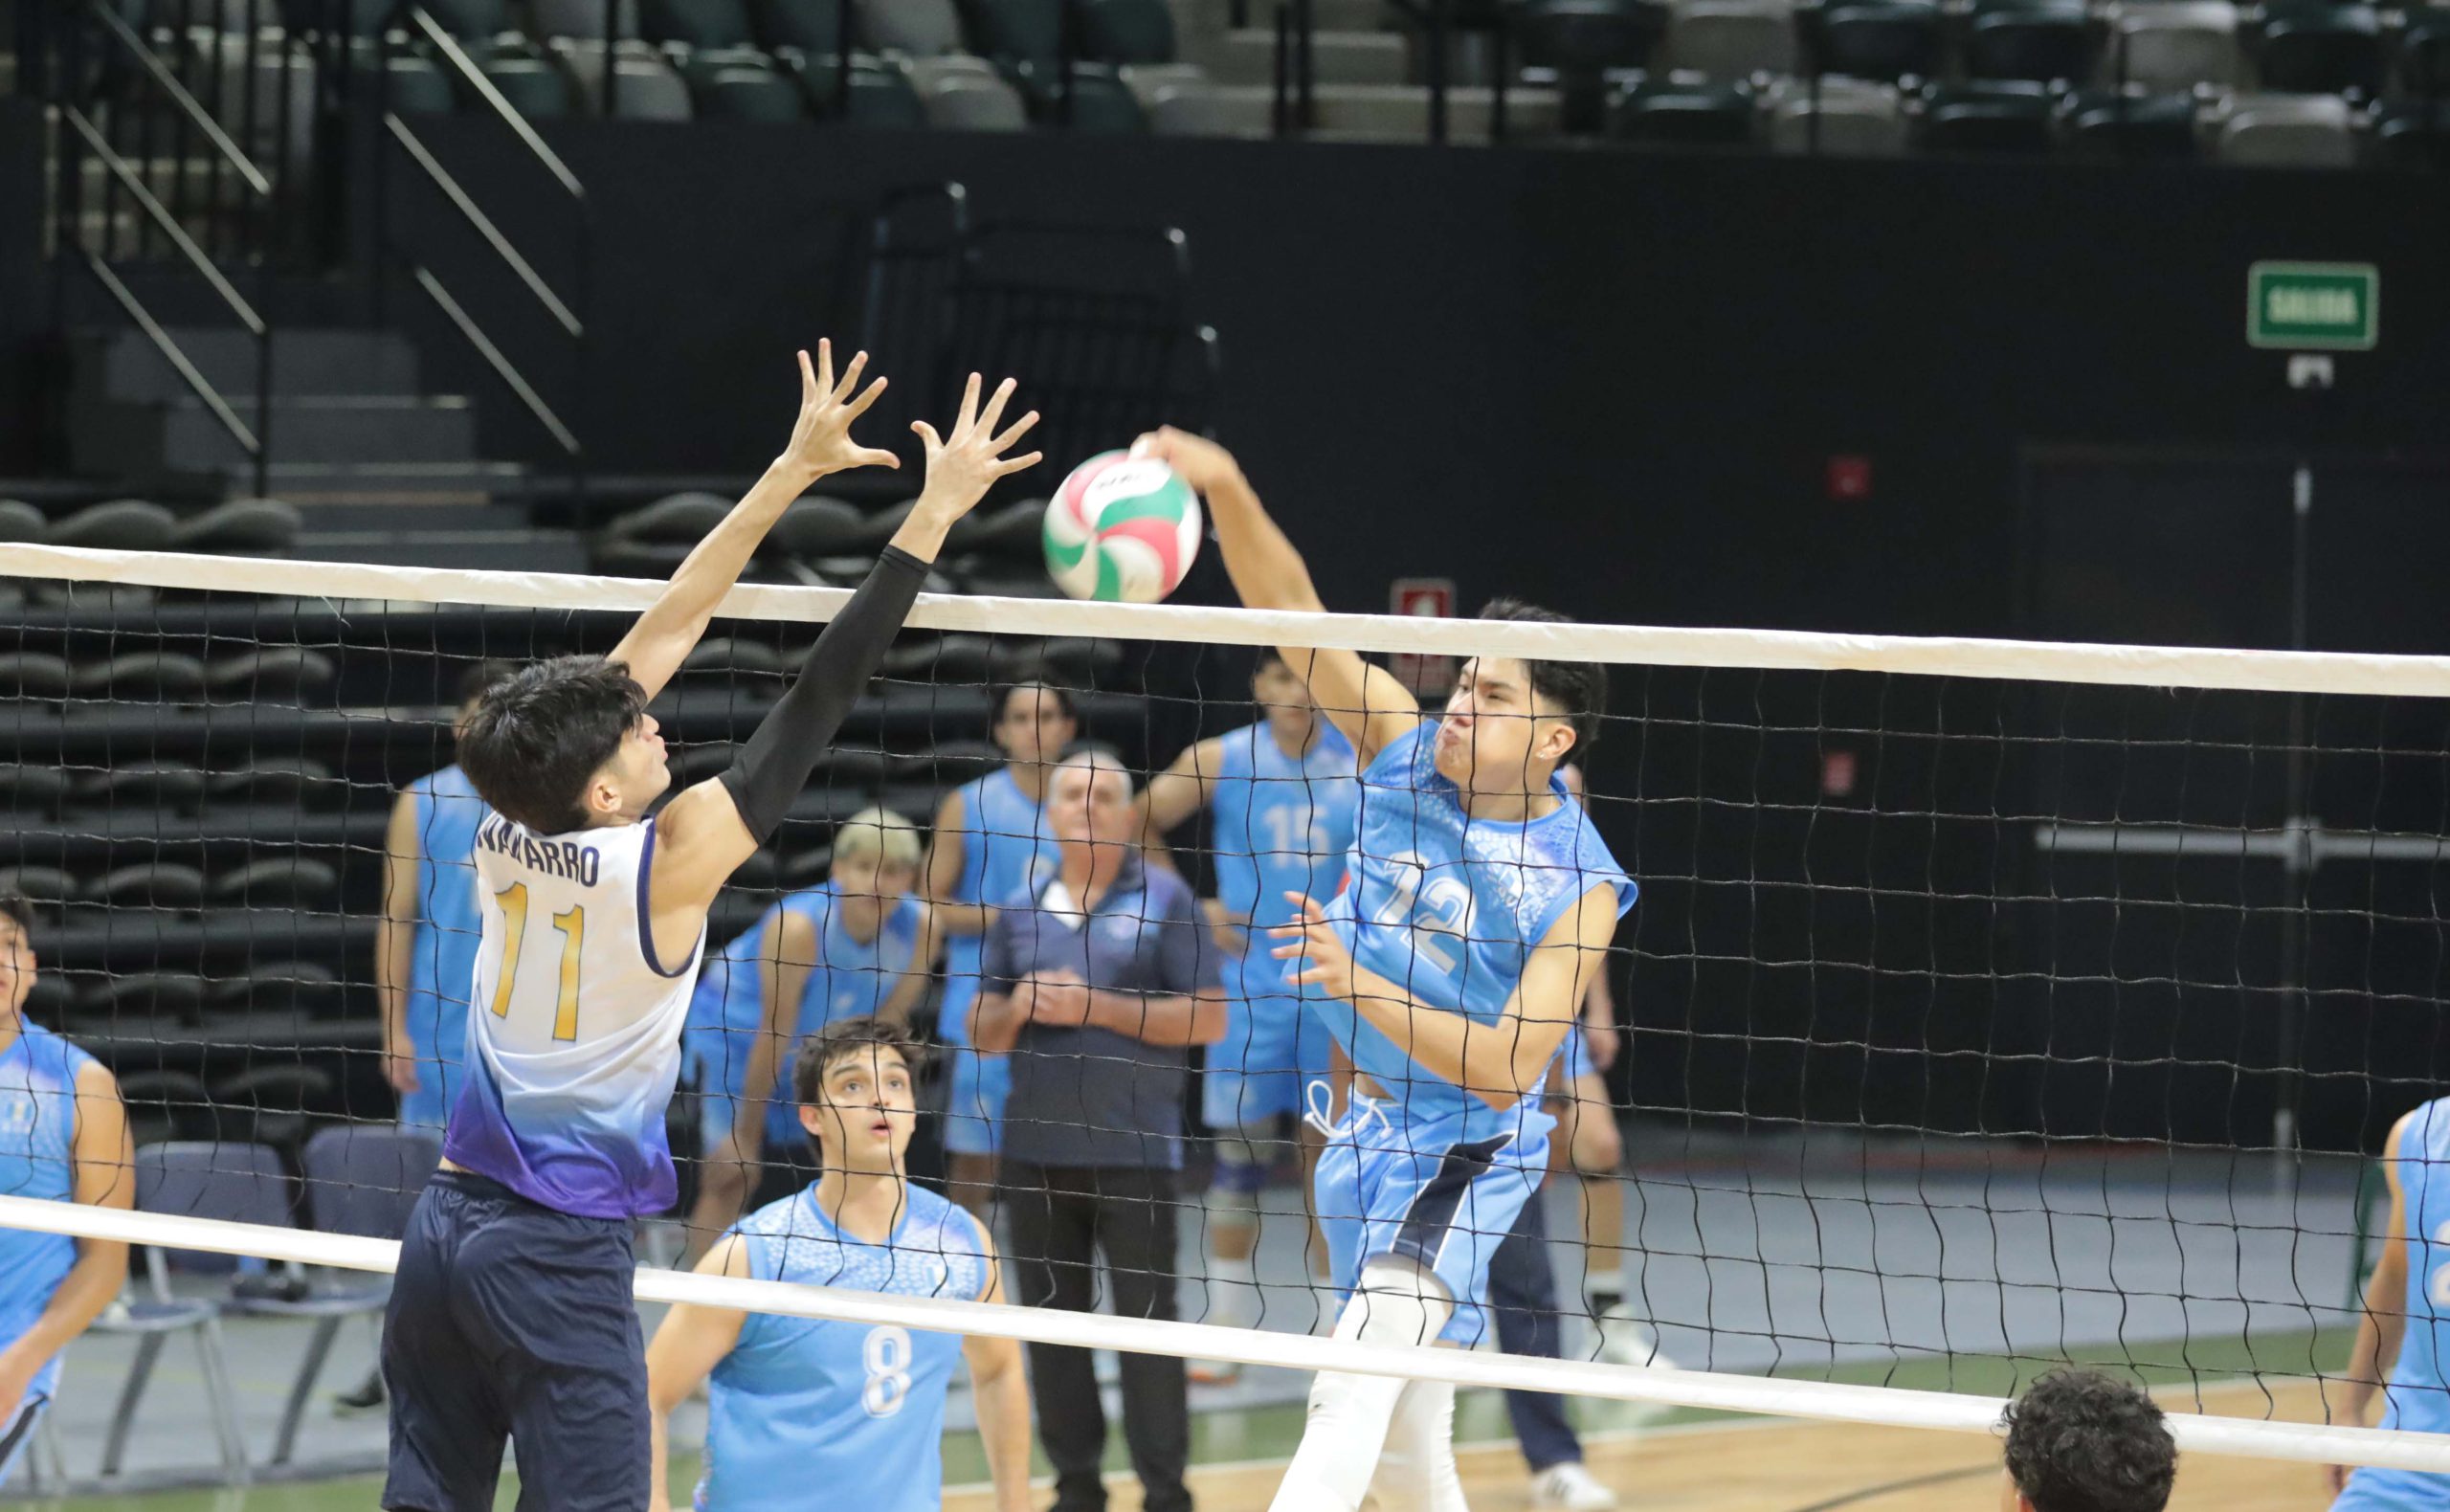 Guatemala wins over El Salvador to remain undefeated